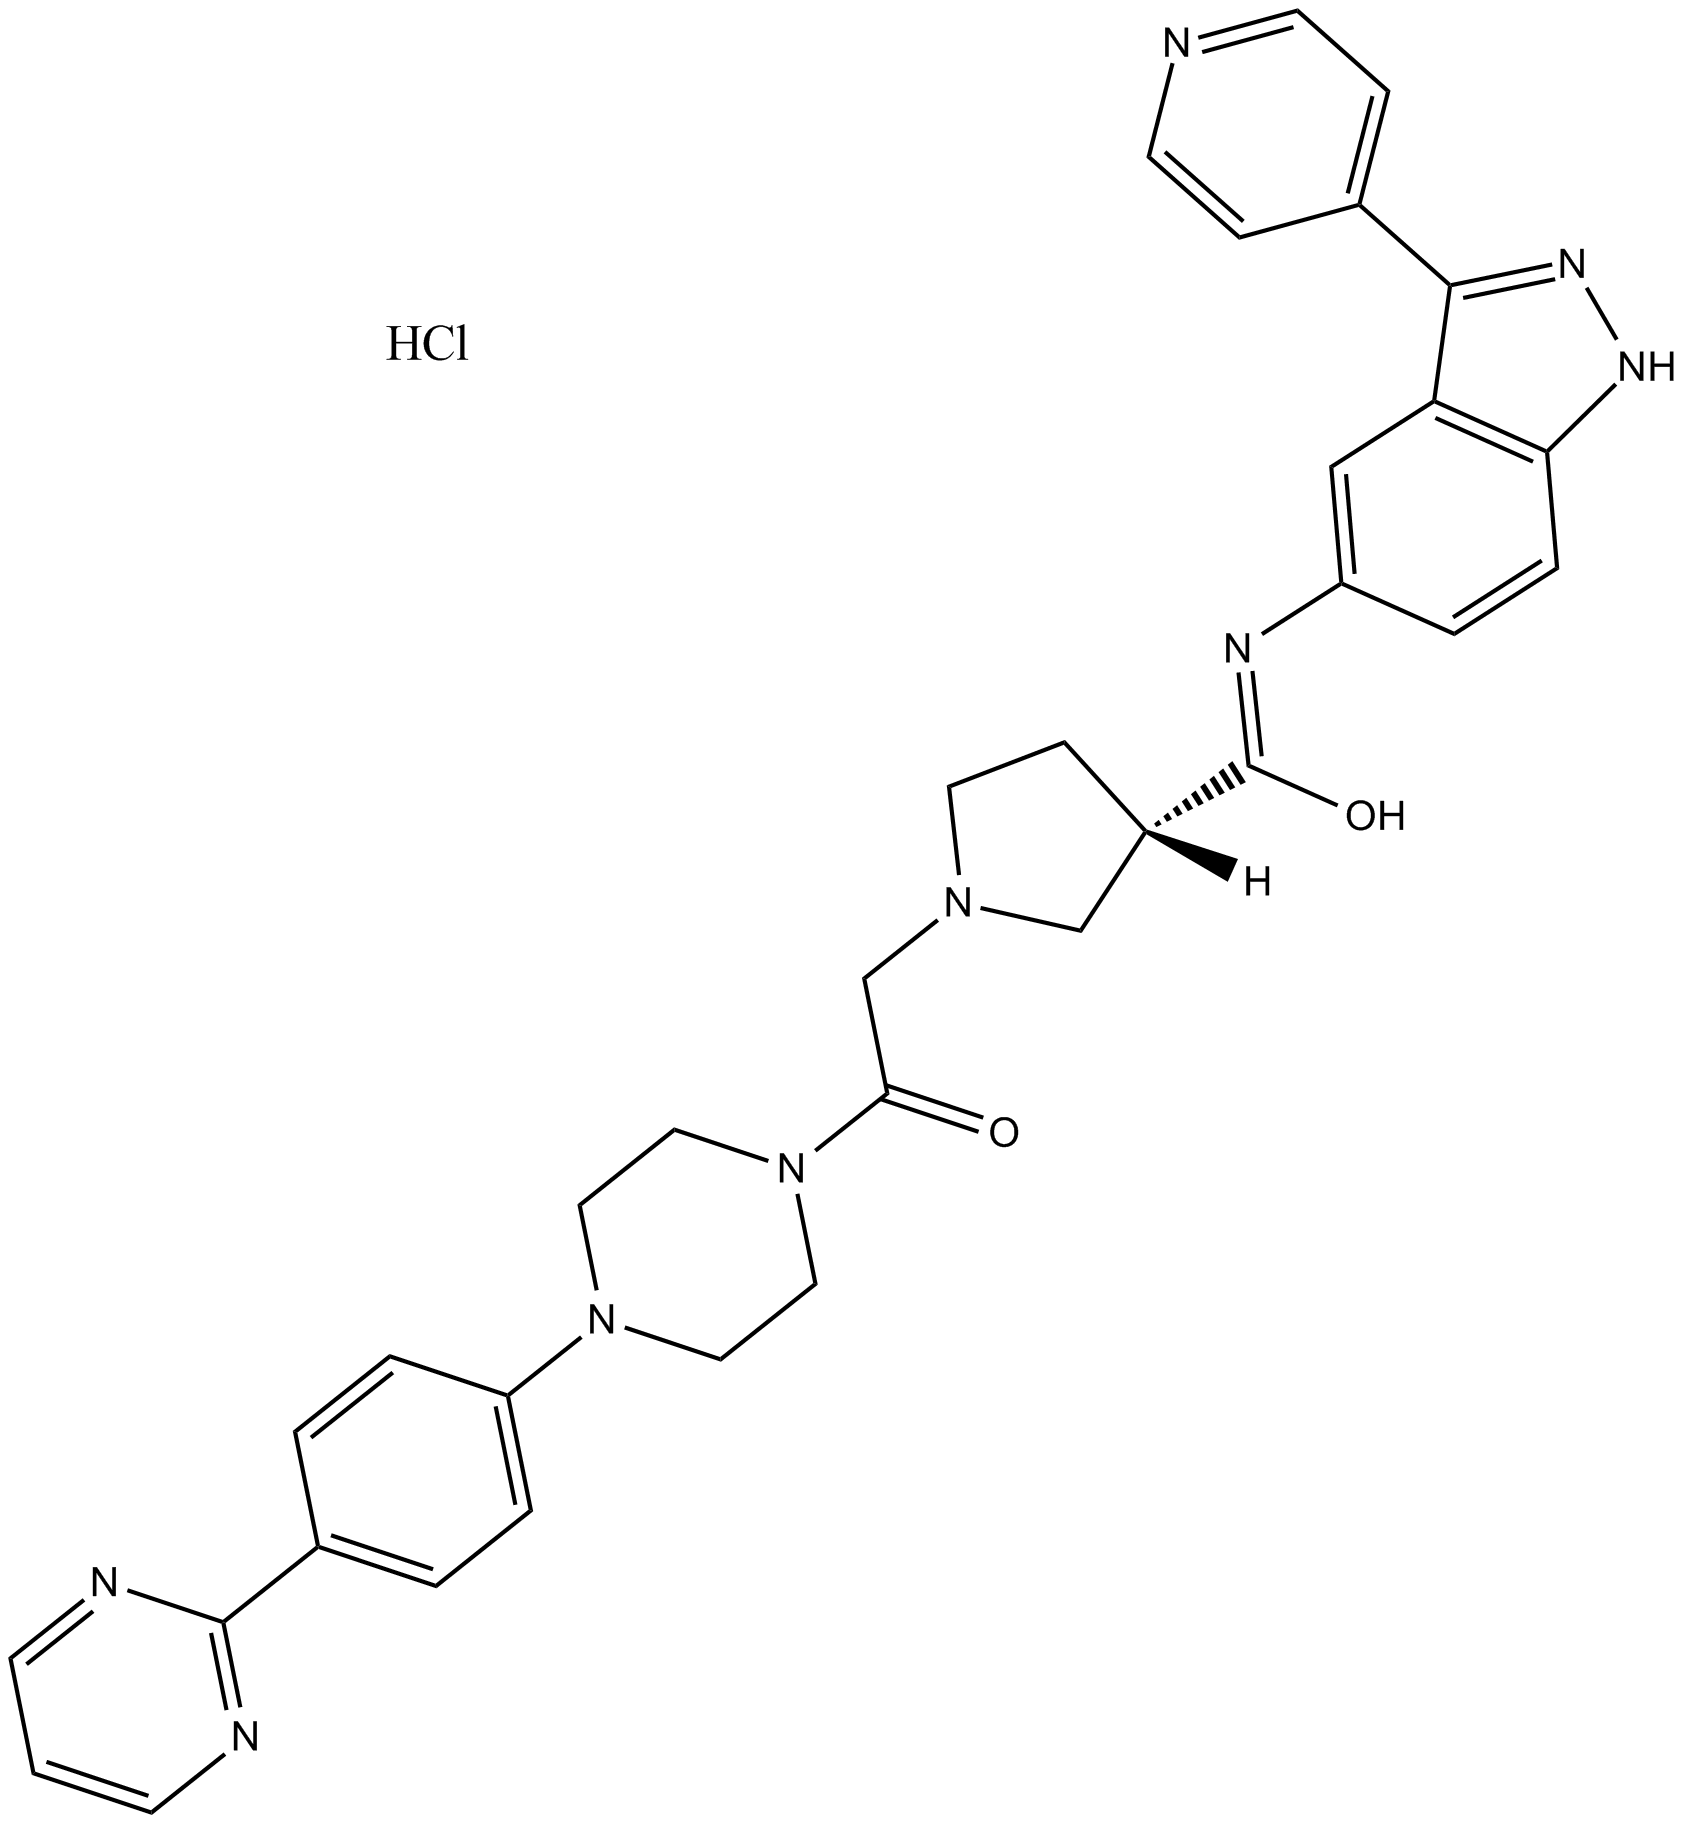 SCH772984 HCl  Chemical Structure